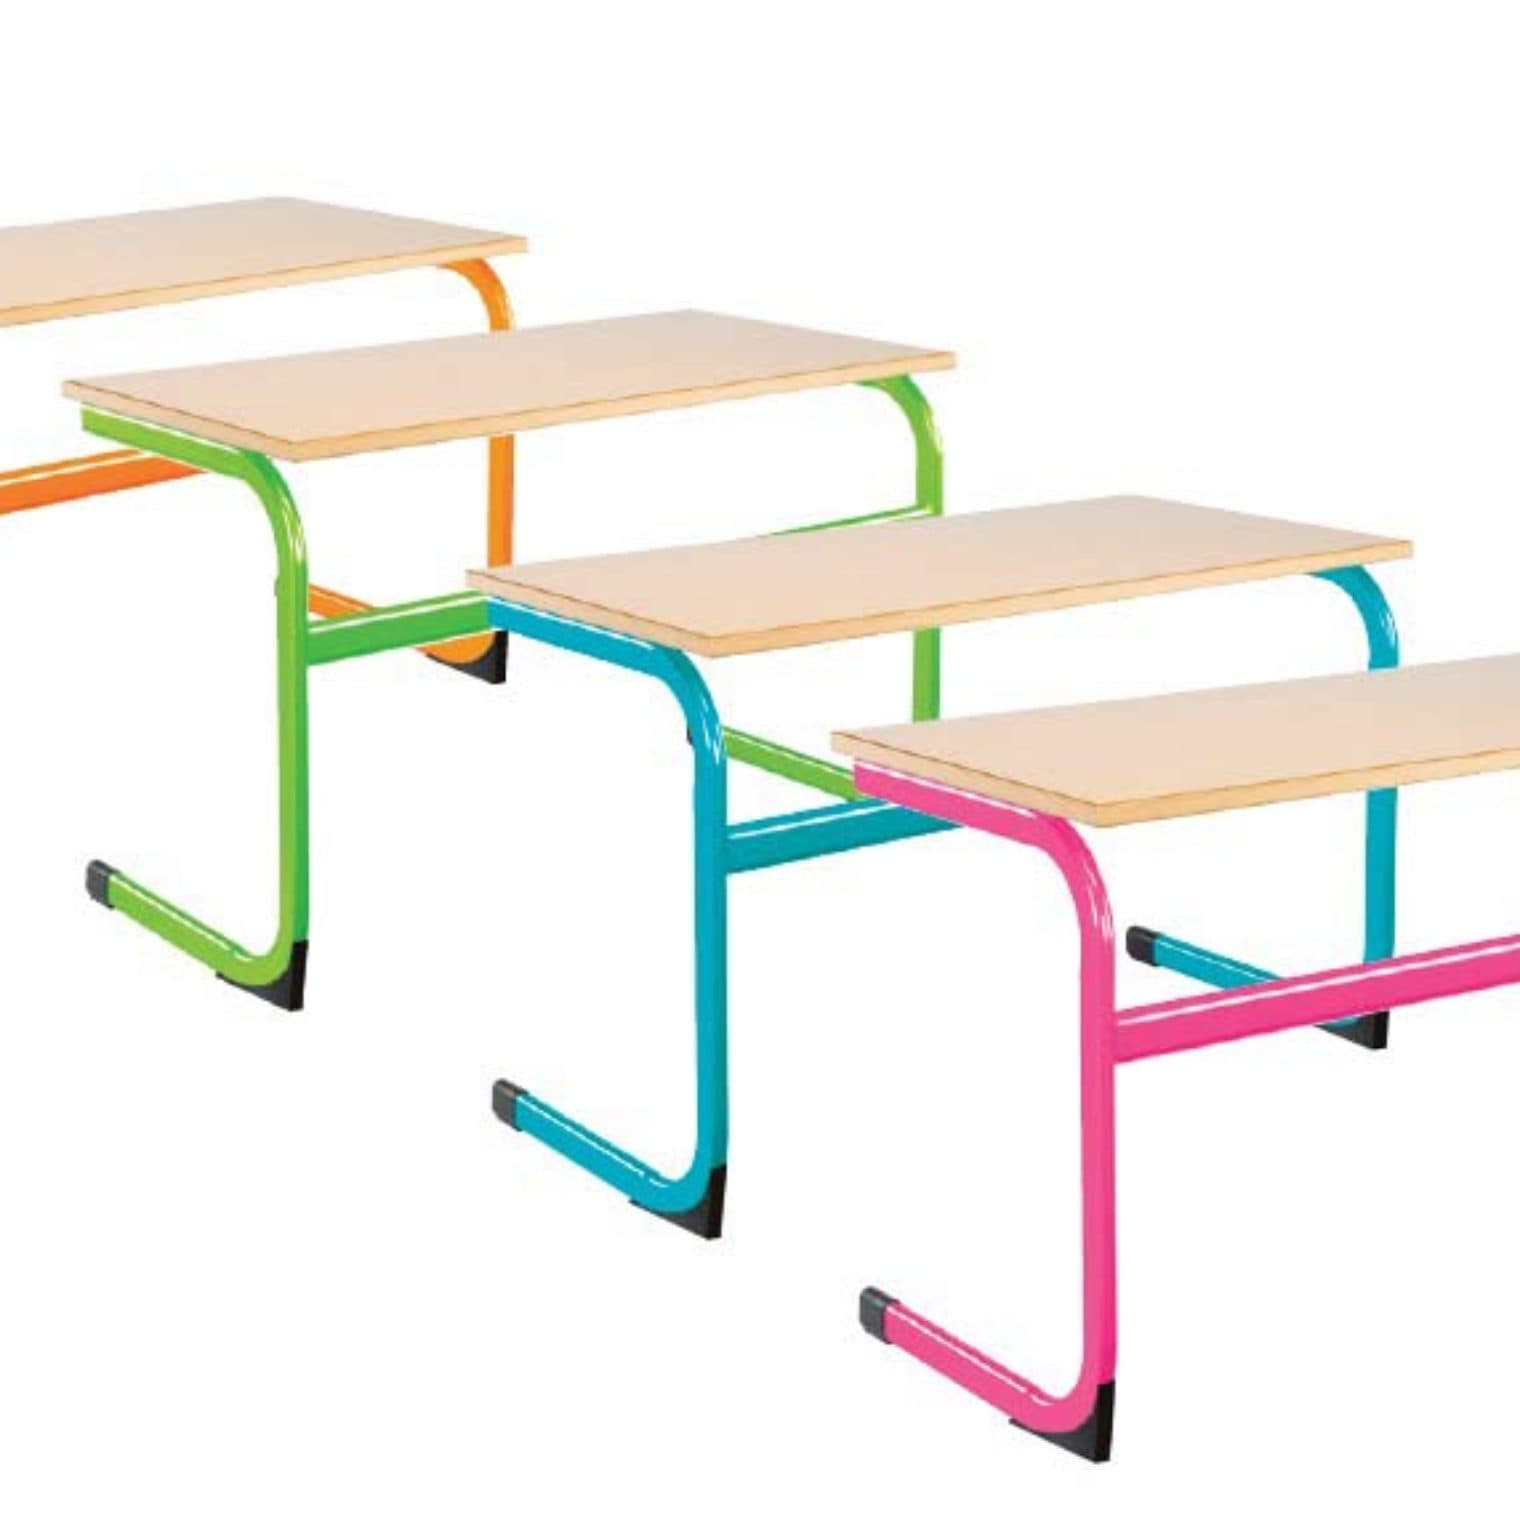 Cantilever Tables